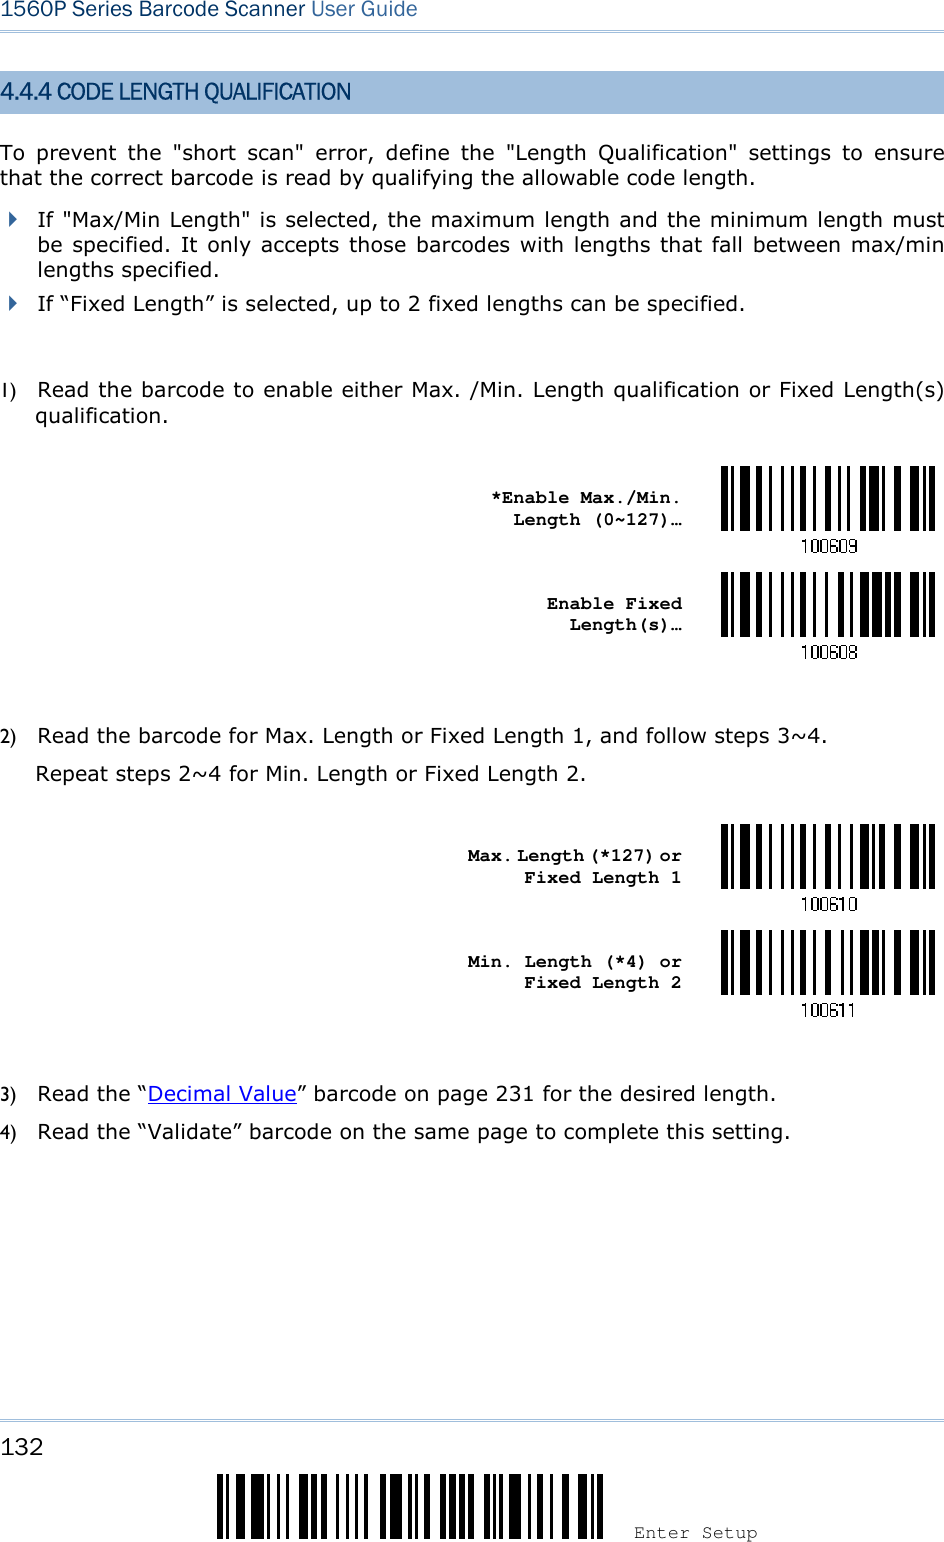 132 Enter Setup 1560P Series Barcode Scanner User Guide 4.4.4 CODE LENGTH QUALIFICATION To  prevent  the  &quot;short  scan&quot;  error,  define  the  &quot;Length  Qualification&quot;  settings  to  ensure that the correct barcode is read by qualifying the allowable code length. If &quot;Max/Min Length&quot; is selected, the maximum length and the minimum length mustbe specified. It only accepts those barcodes with lengths that fall between max/minlengths specified.If “Fixed Length” is selected, up to 2 fixed lengths can be specified.1) Read the barcode to enable either Max. /Min. Length qualification or Fixed Length(s)qualification.*Enable Max./Min.Length (0~127)… Enable Fixed Length(s)… 2) Read the barcode for Max. Length or Fixed Length 1, and follow steps 3~4.Repeat steps 2~4 for Min. Length or Fixed Length 2.Max. Length (*127) or Fixed Length 1 Min. Length (*4) or Fixed Length 2 3) Read the “Decimal Value” barcode on page 231 for the desired length.4) Read the “Validate” barcode on the same page to complete this setting.